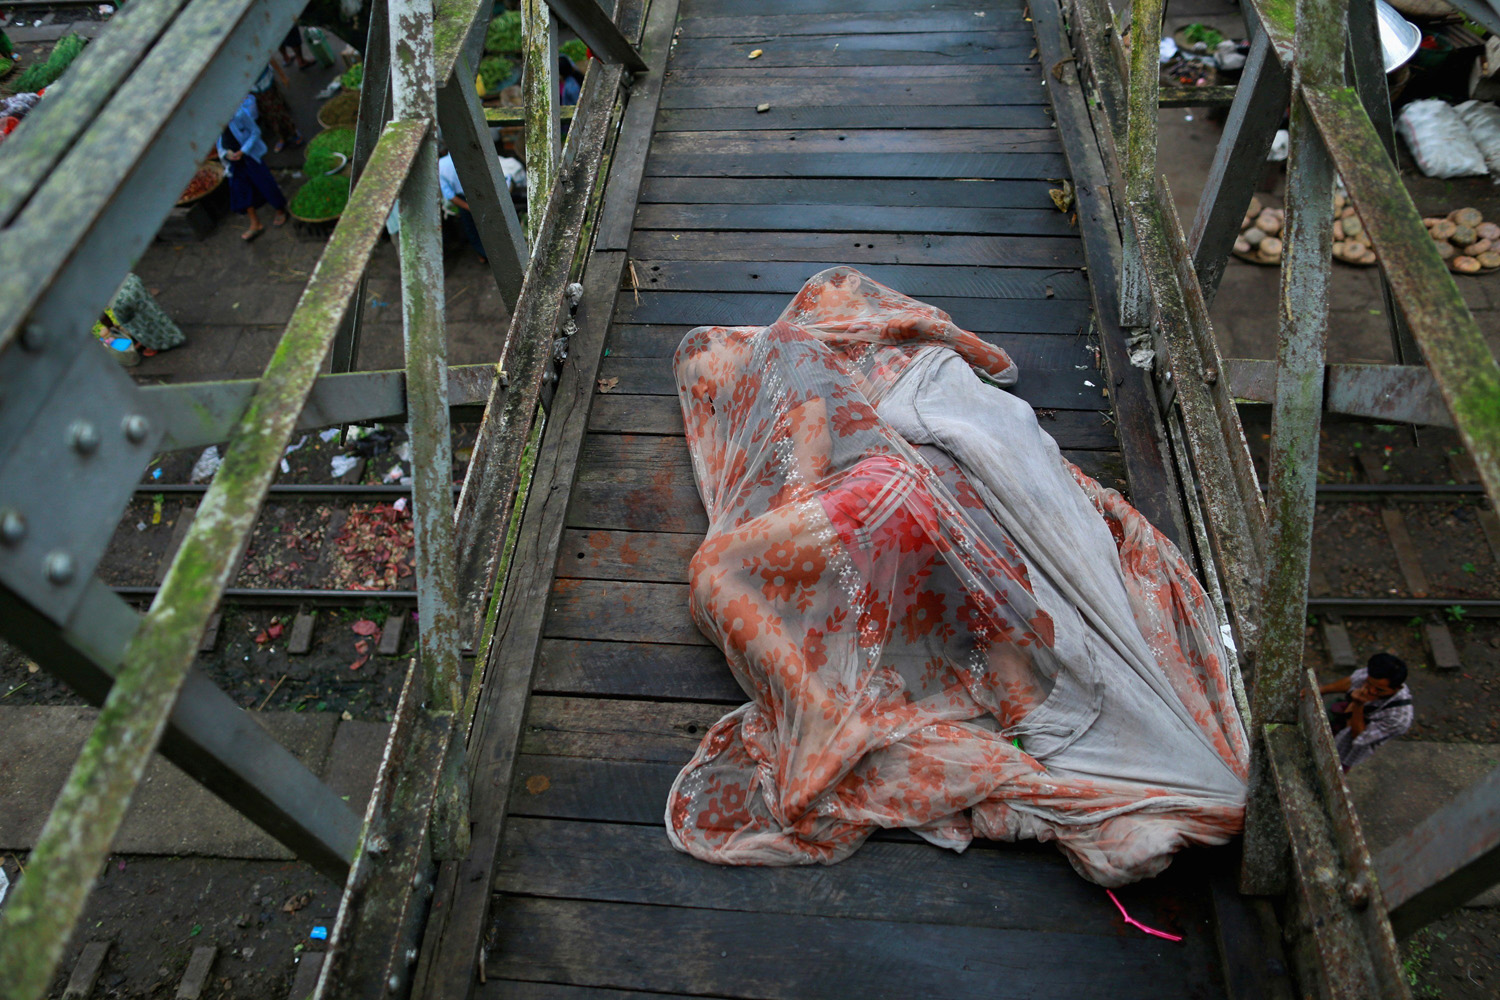 Men sleep covered with a mosquito net on a bridge above a train station outside Yangon